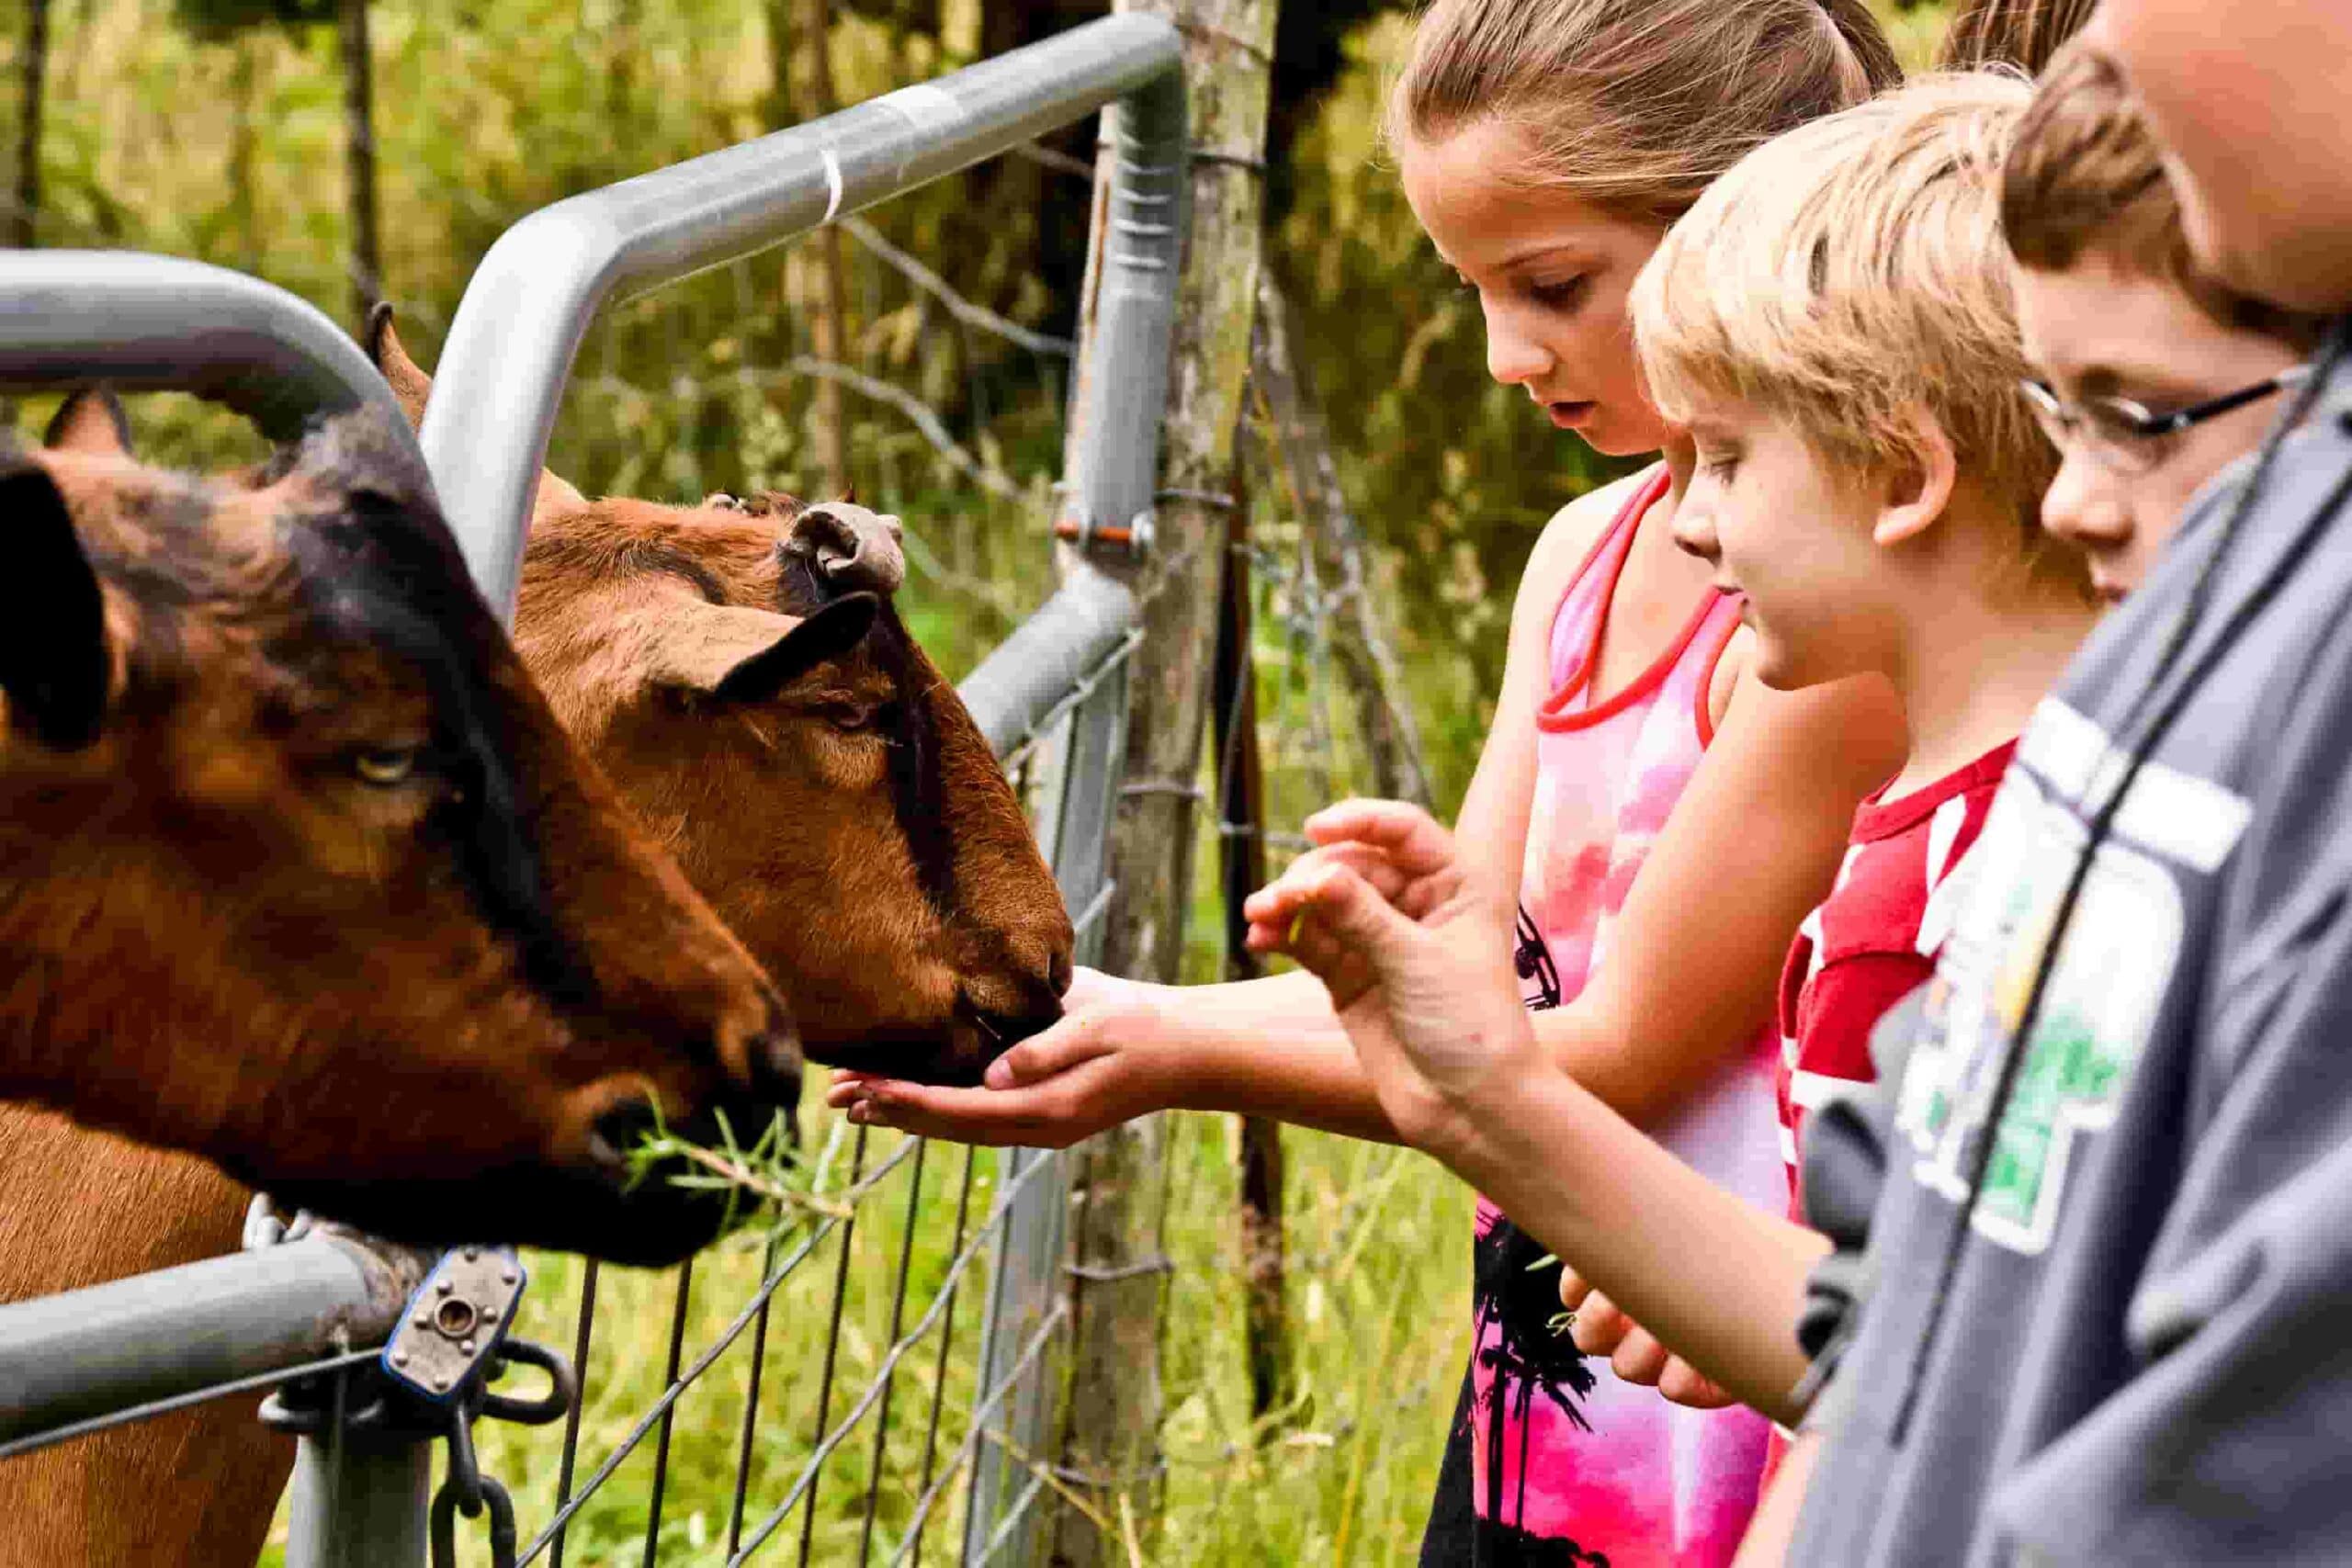 Youth summer farm camp for kids